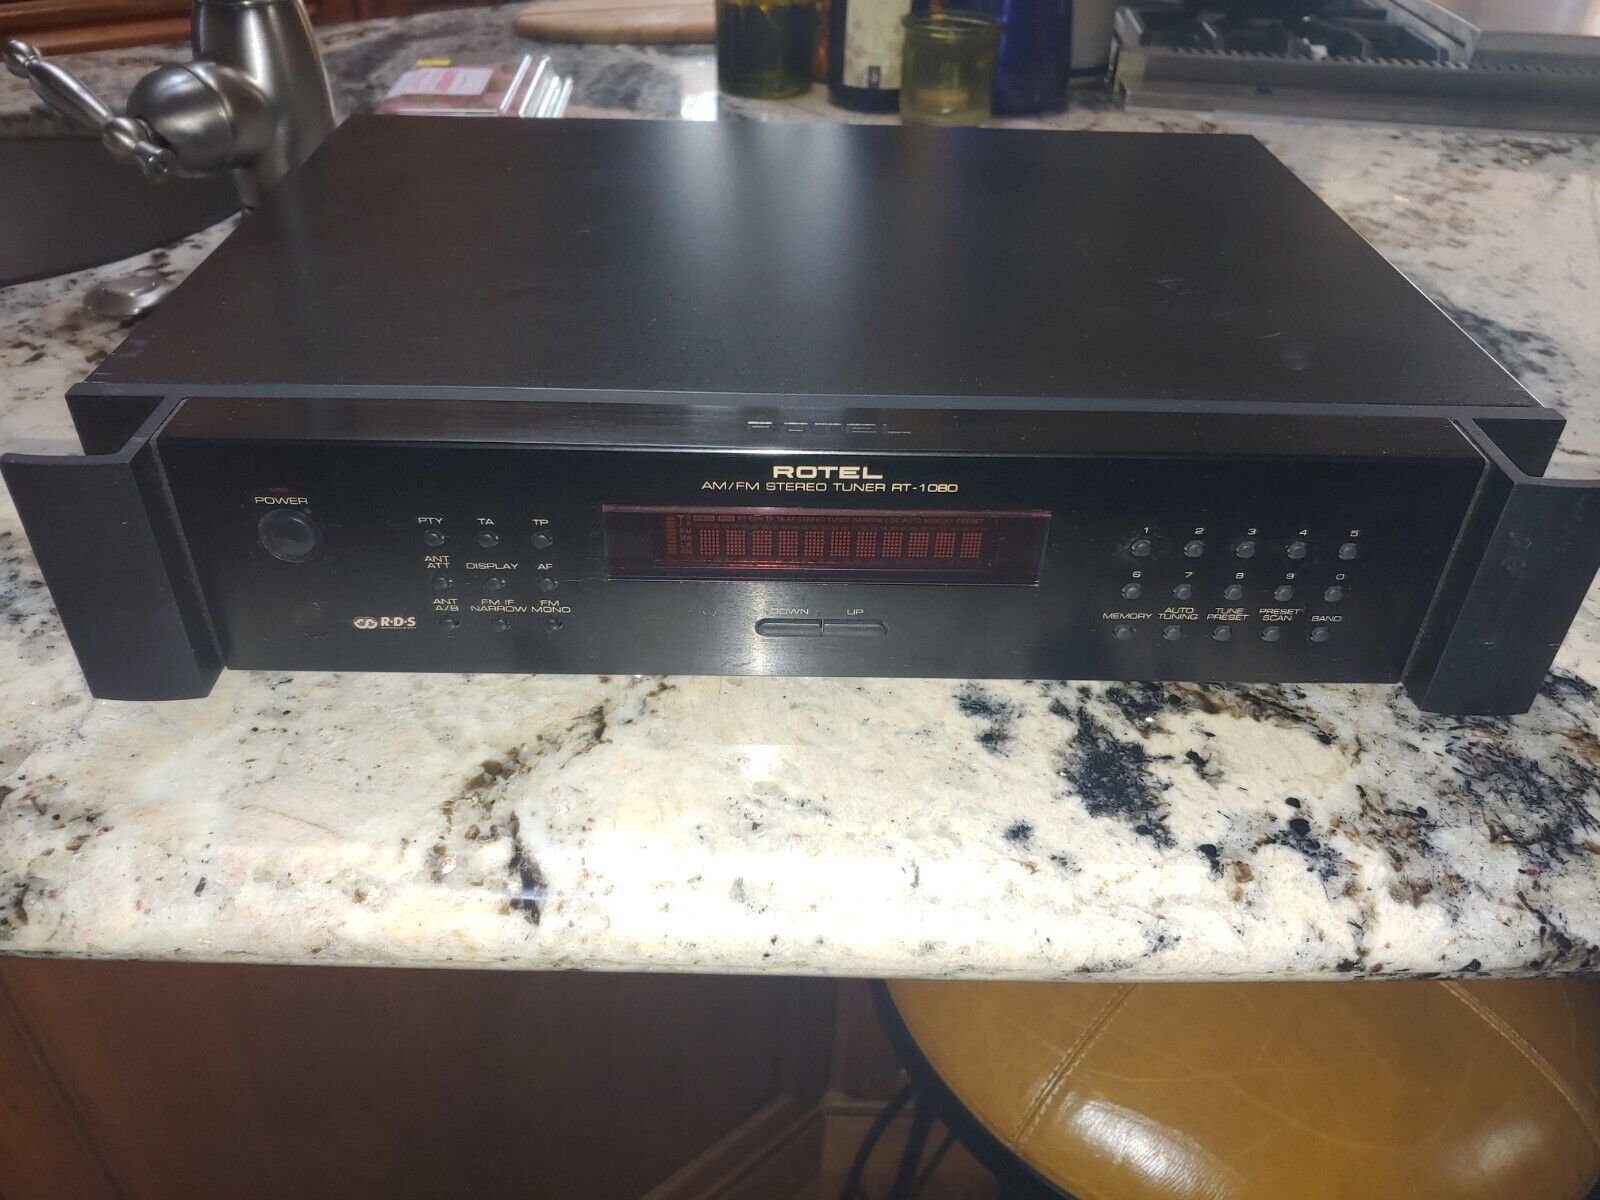 ROTEL AM/FM Stereo Tuner RT-1080